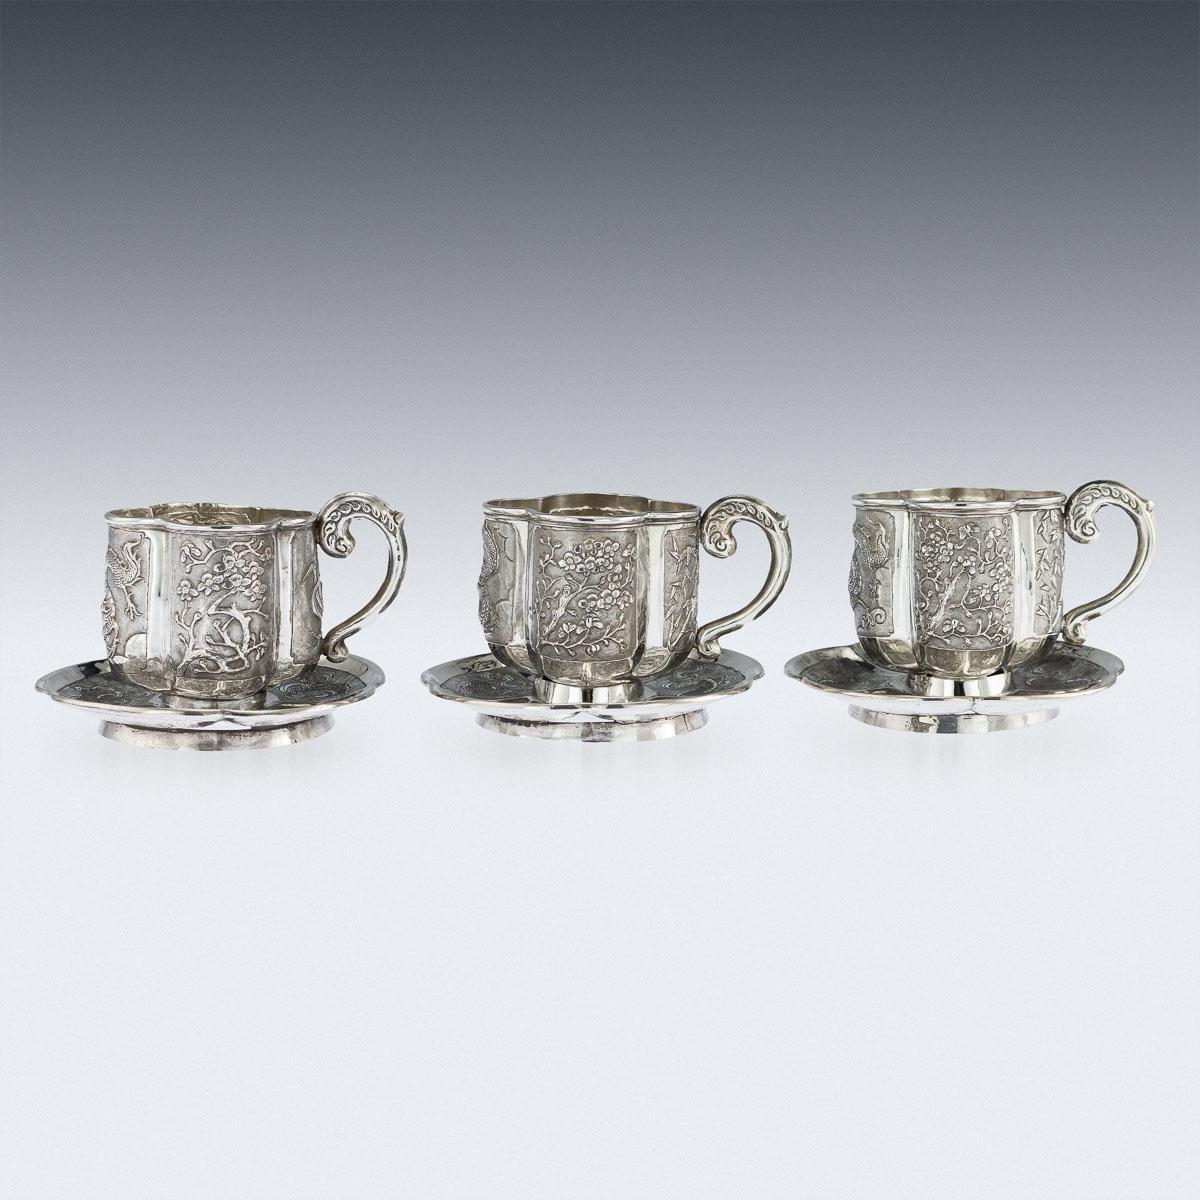 Antique late 19th century Chinese solid silver set of three tea cups and saucers, handcrafted and intricately engraved with dragon, cherry blossom, bamboo and applied shaped handles. Saucers hallmarked with Chinese character marks (acid tested shows